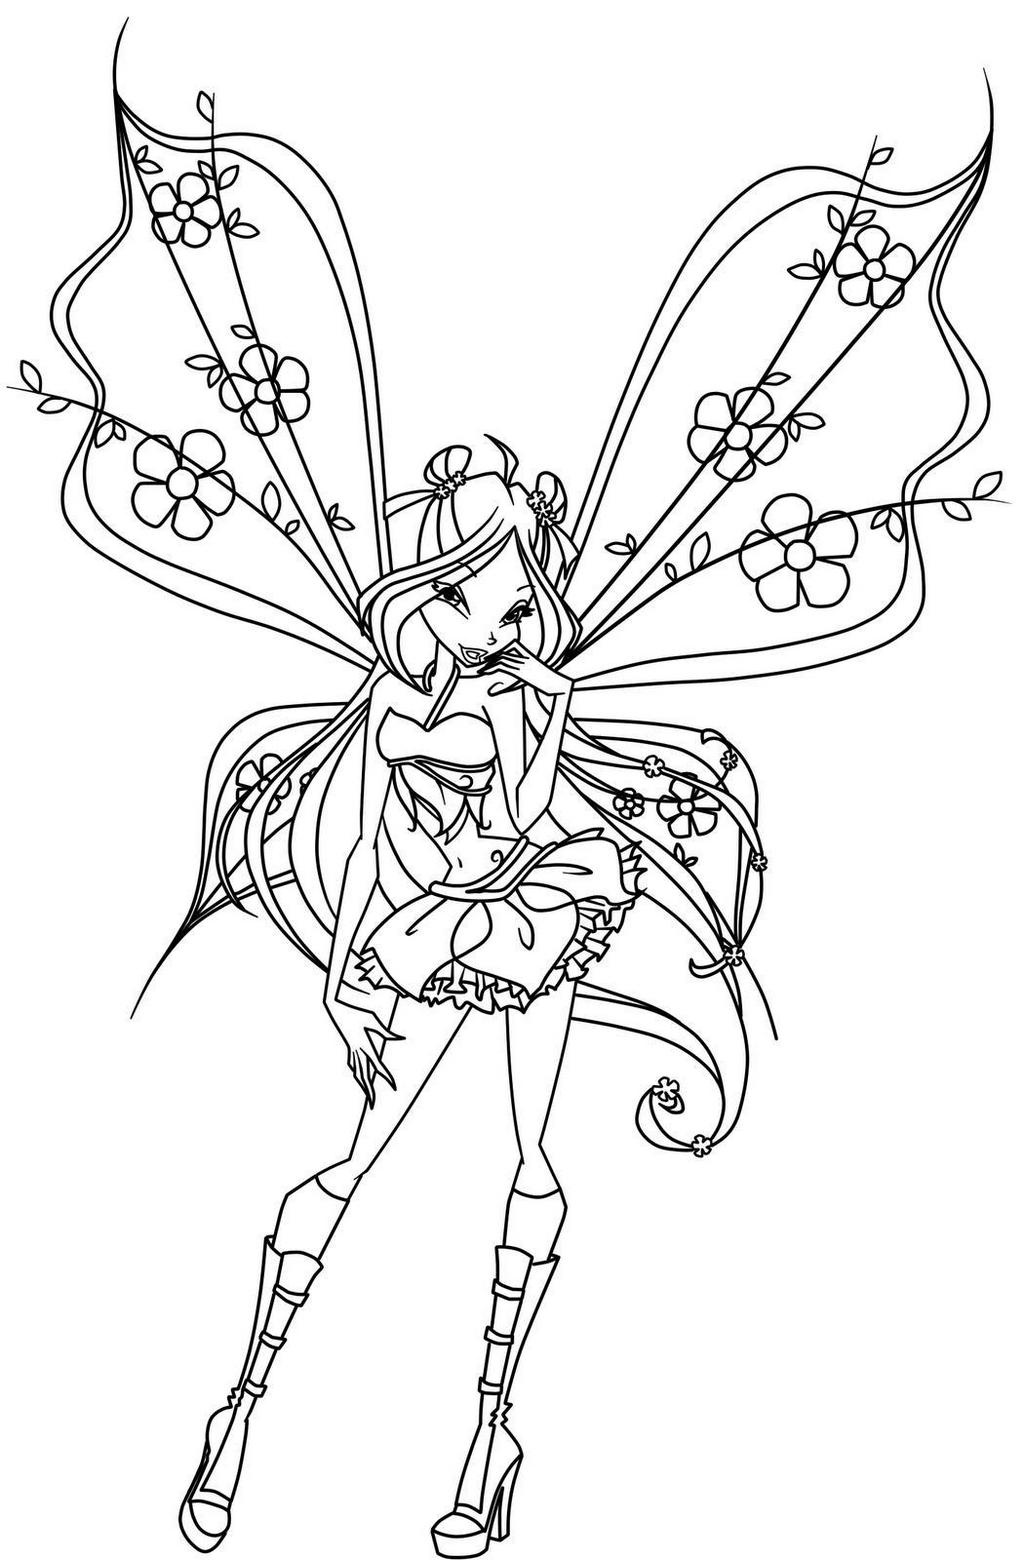 Fantastic Flora the Winx Club Coloring Page